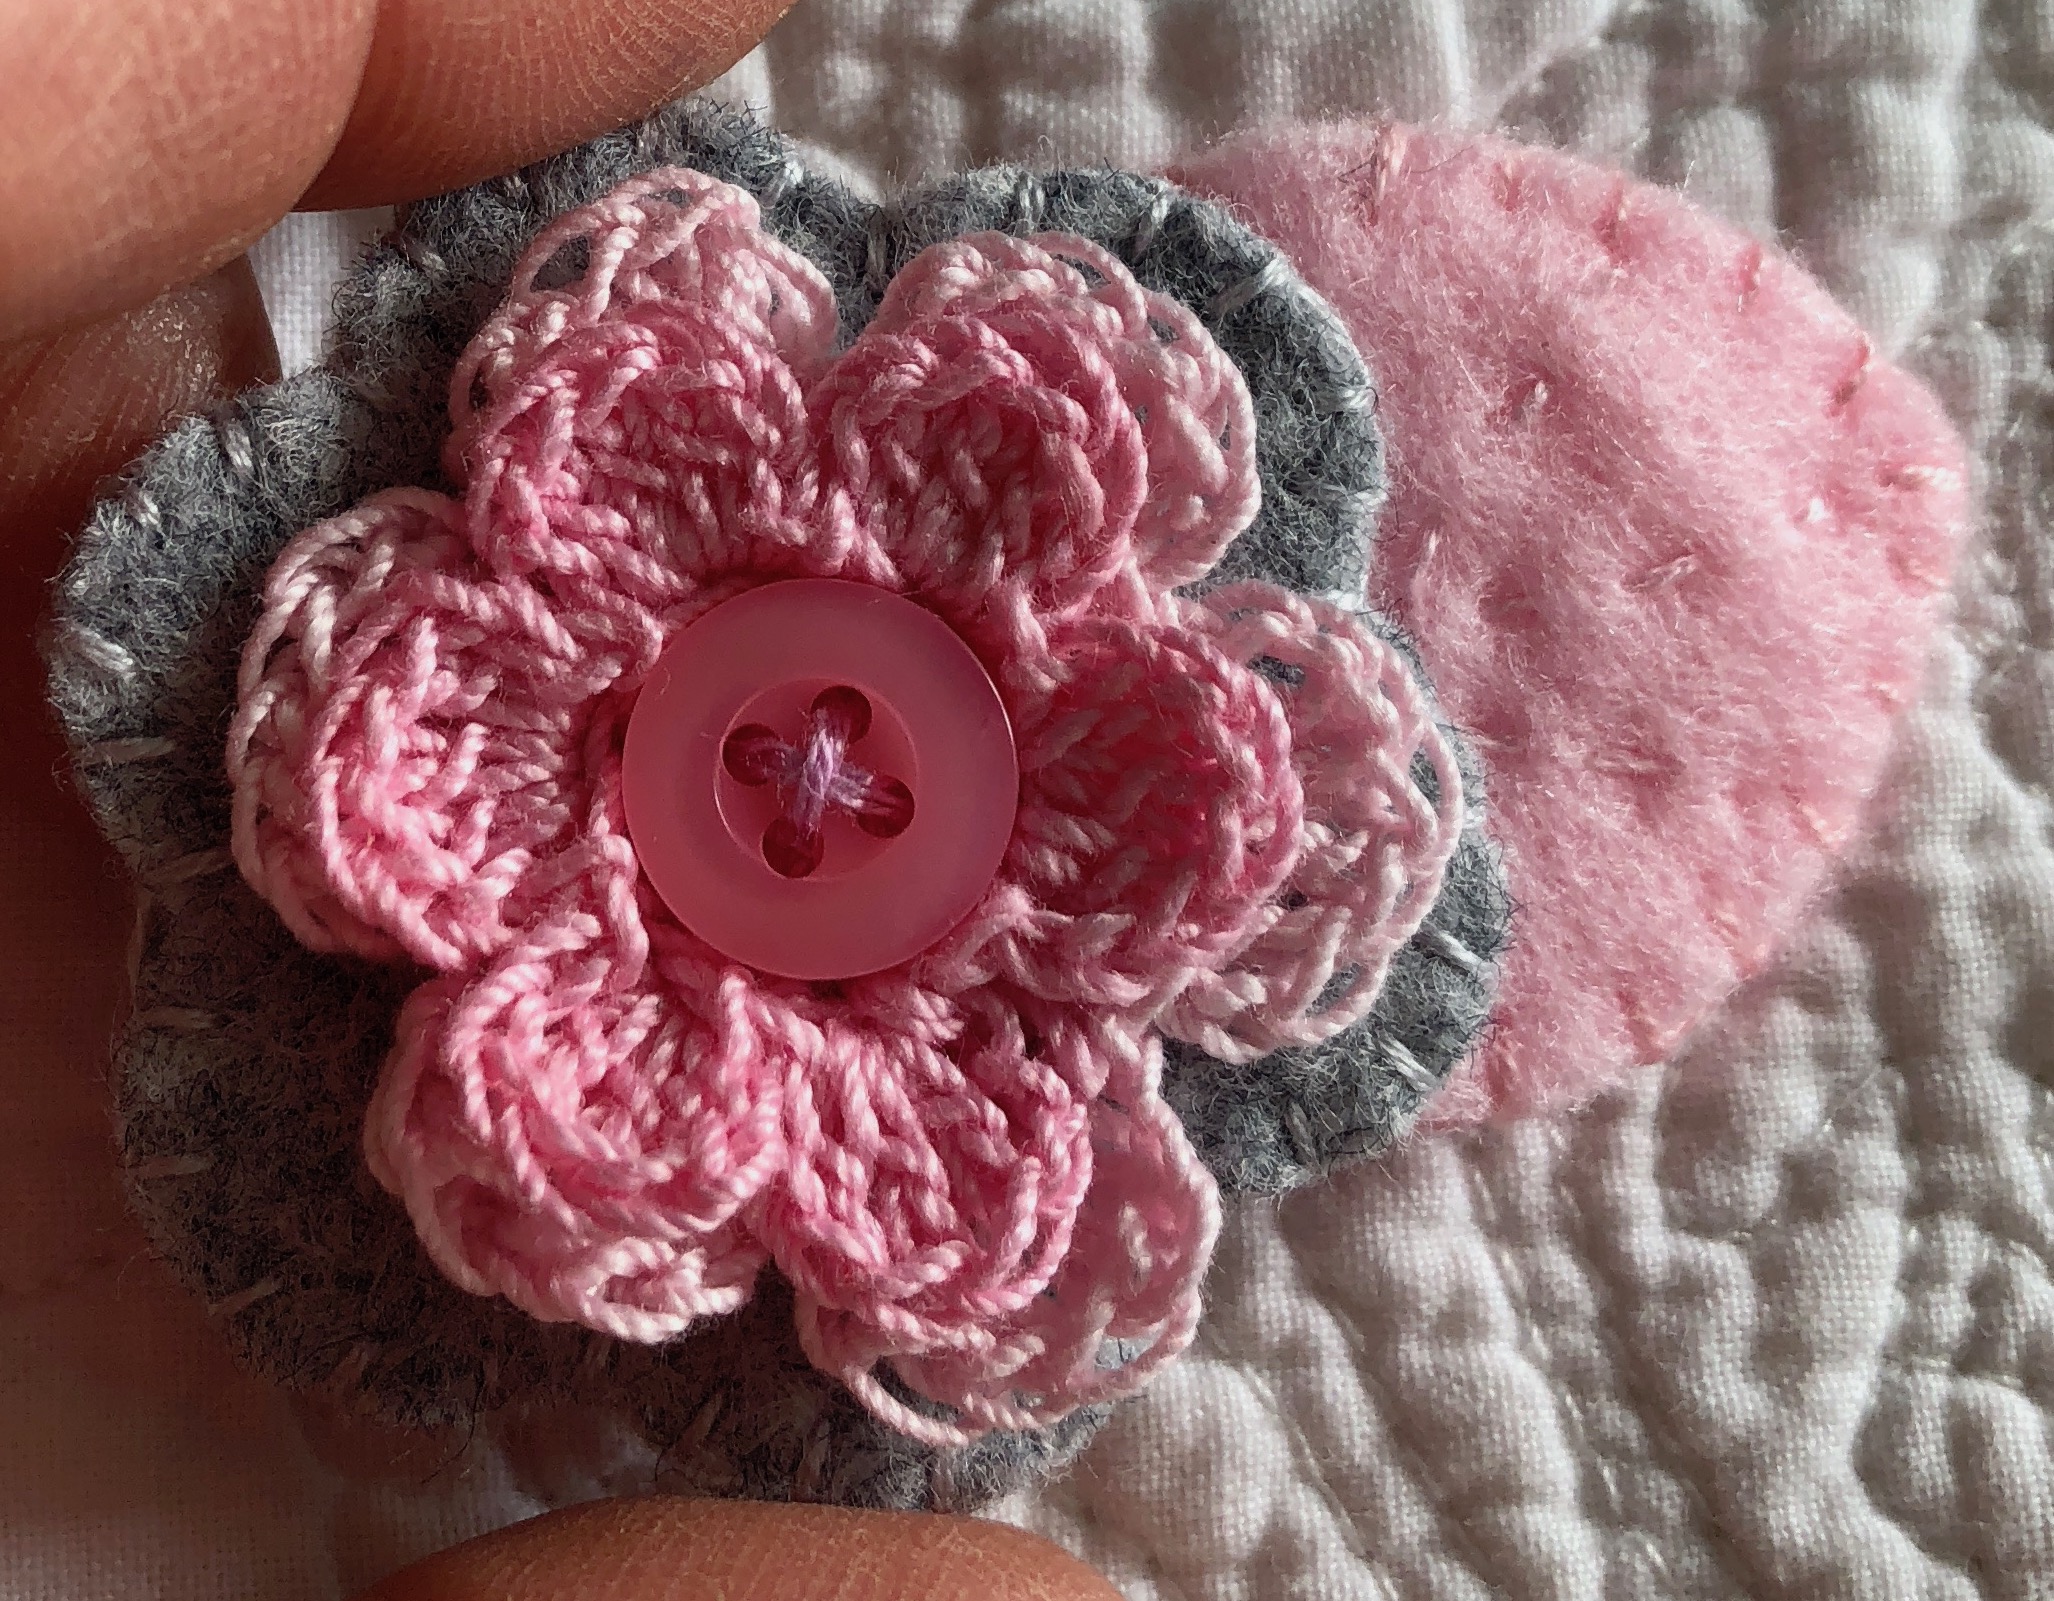 Small hand stitched felt and crocheted flower brooch in pinks and pale grey with a pink button centre.